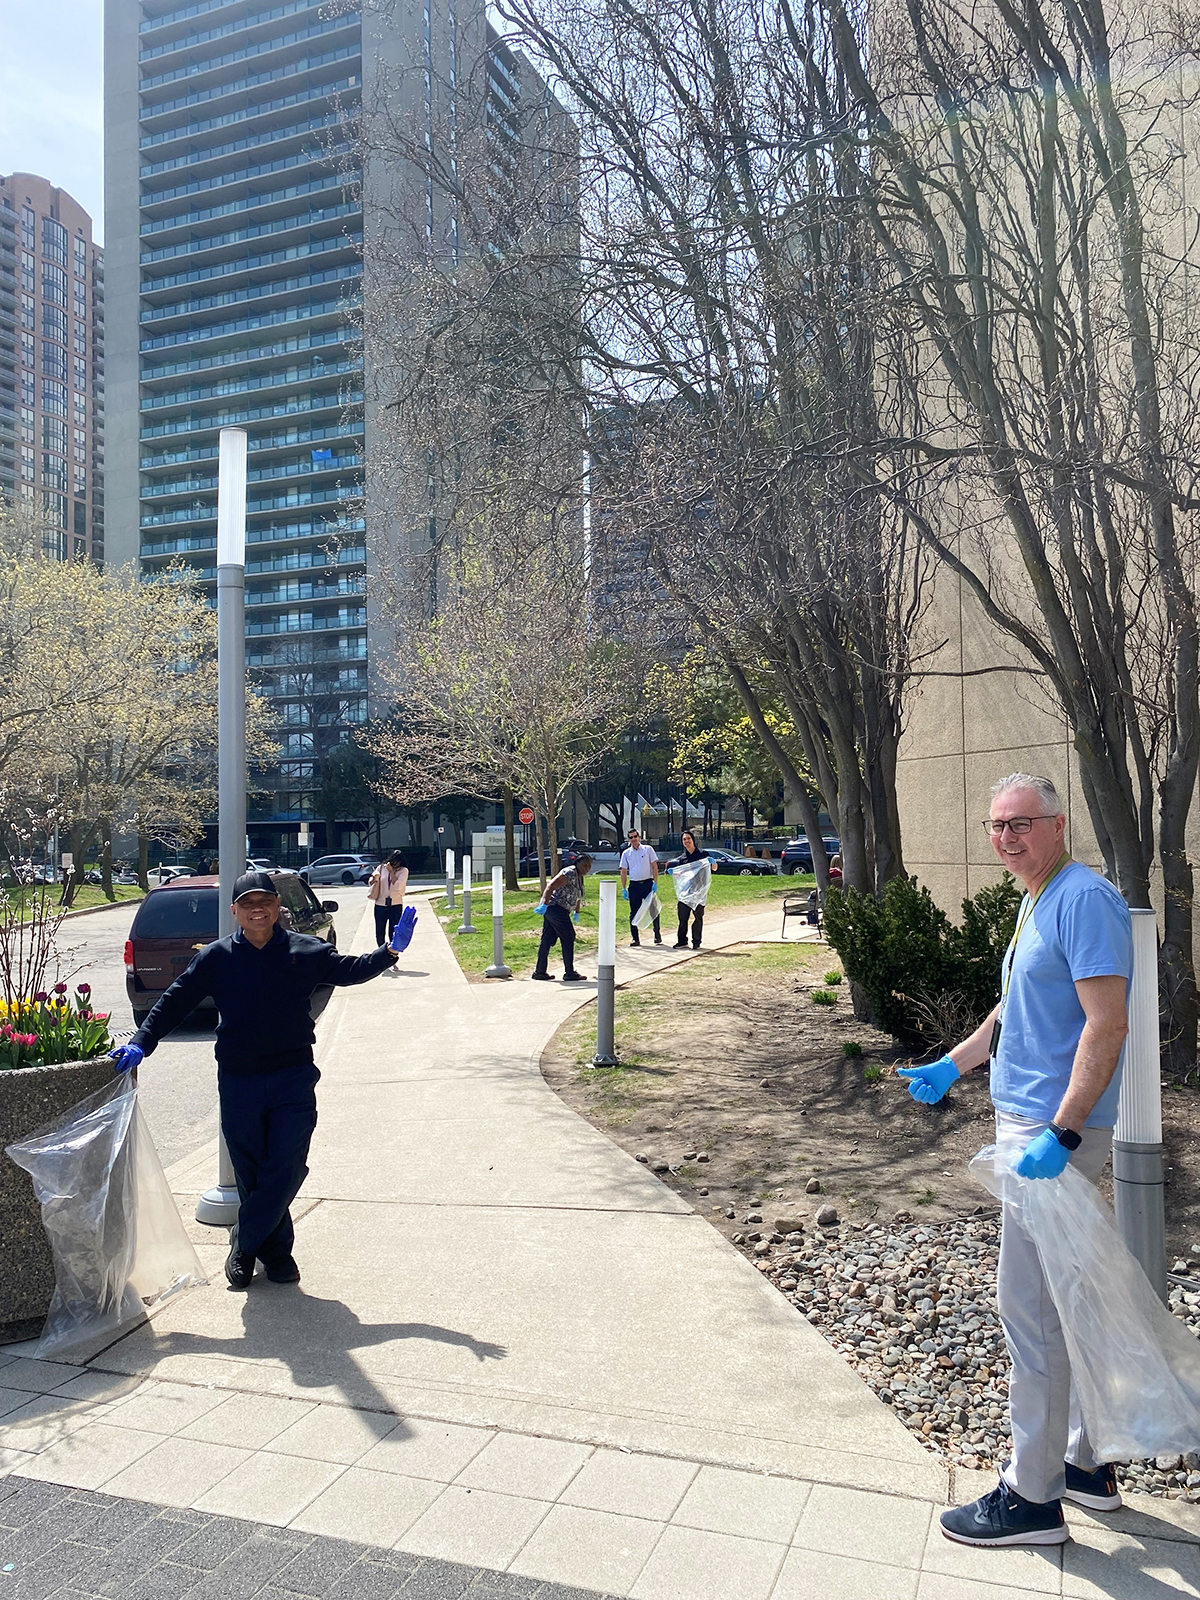 (Catholic Education Center) staff cleaning up the area in front of the CEC office building.